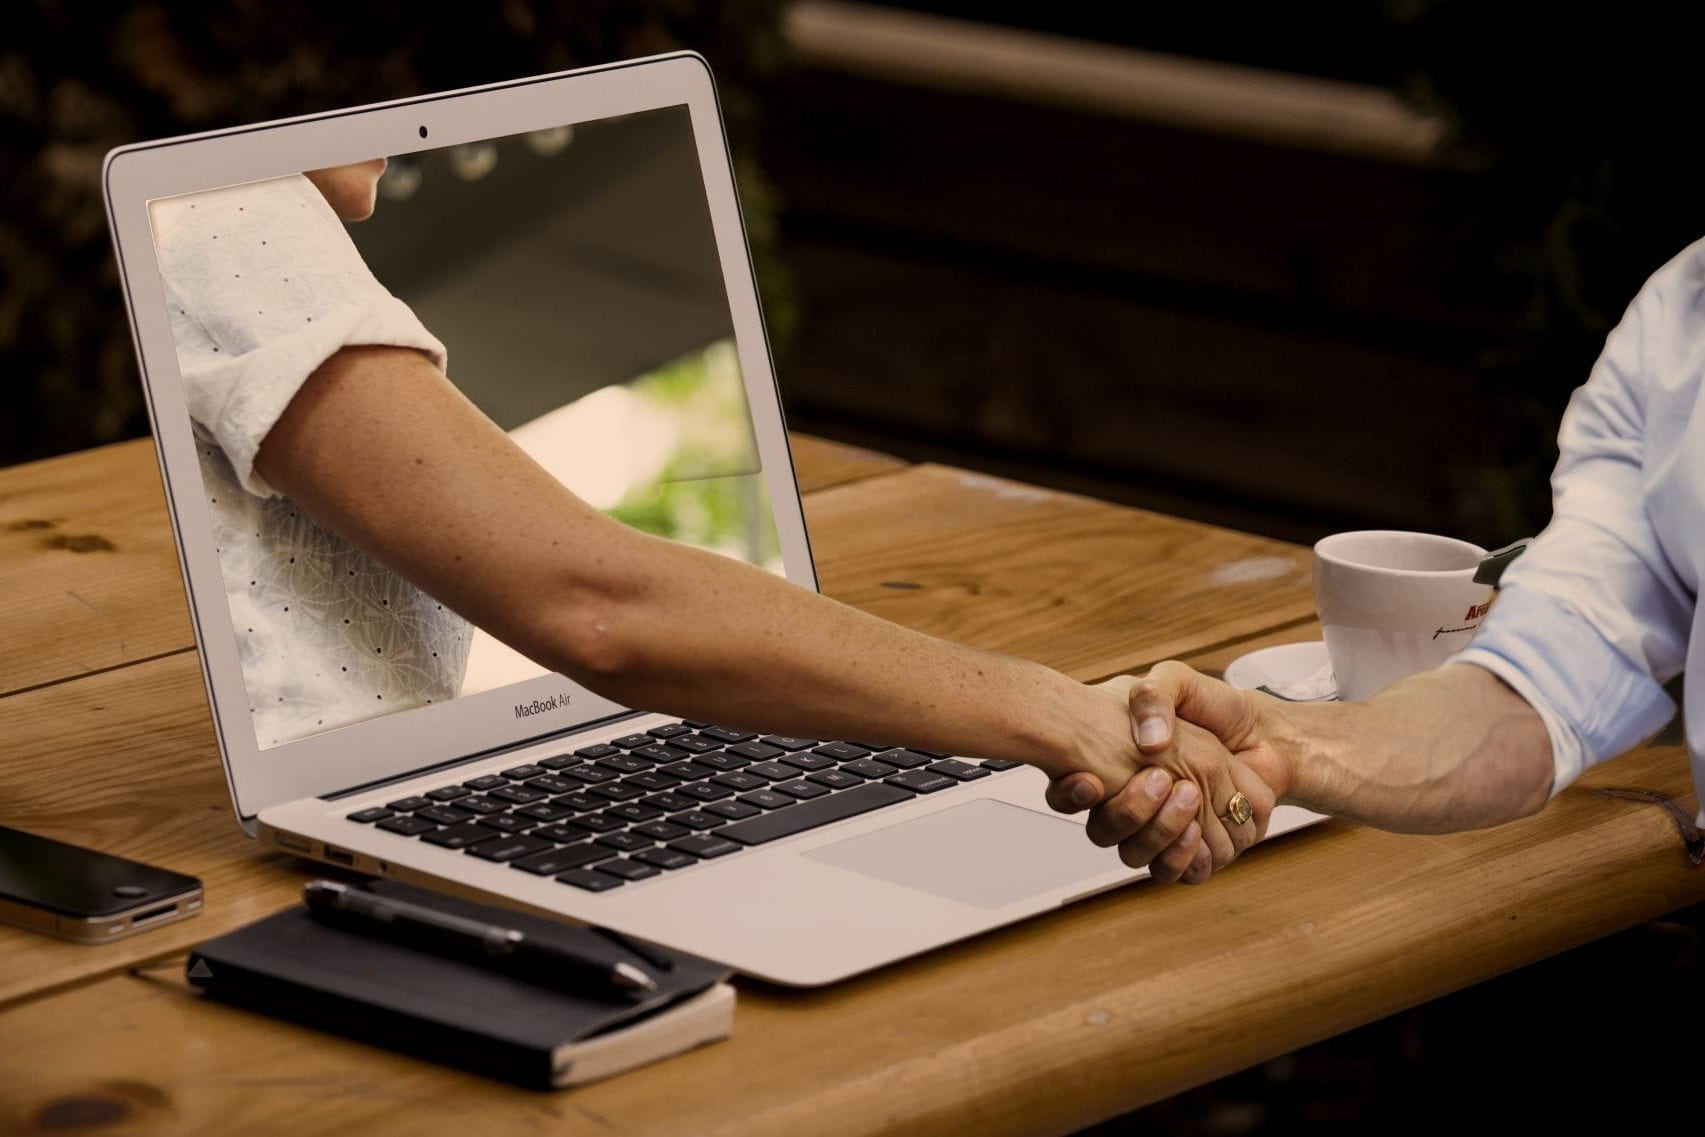 Two people shaking hands.  One person is on one side of a laptop computer, and the other person appears to be inside the screen of the computer, with their hand reaching through the screen to connect with the hand of the other person.